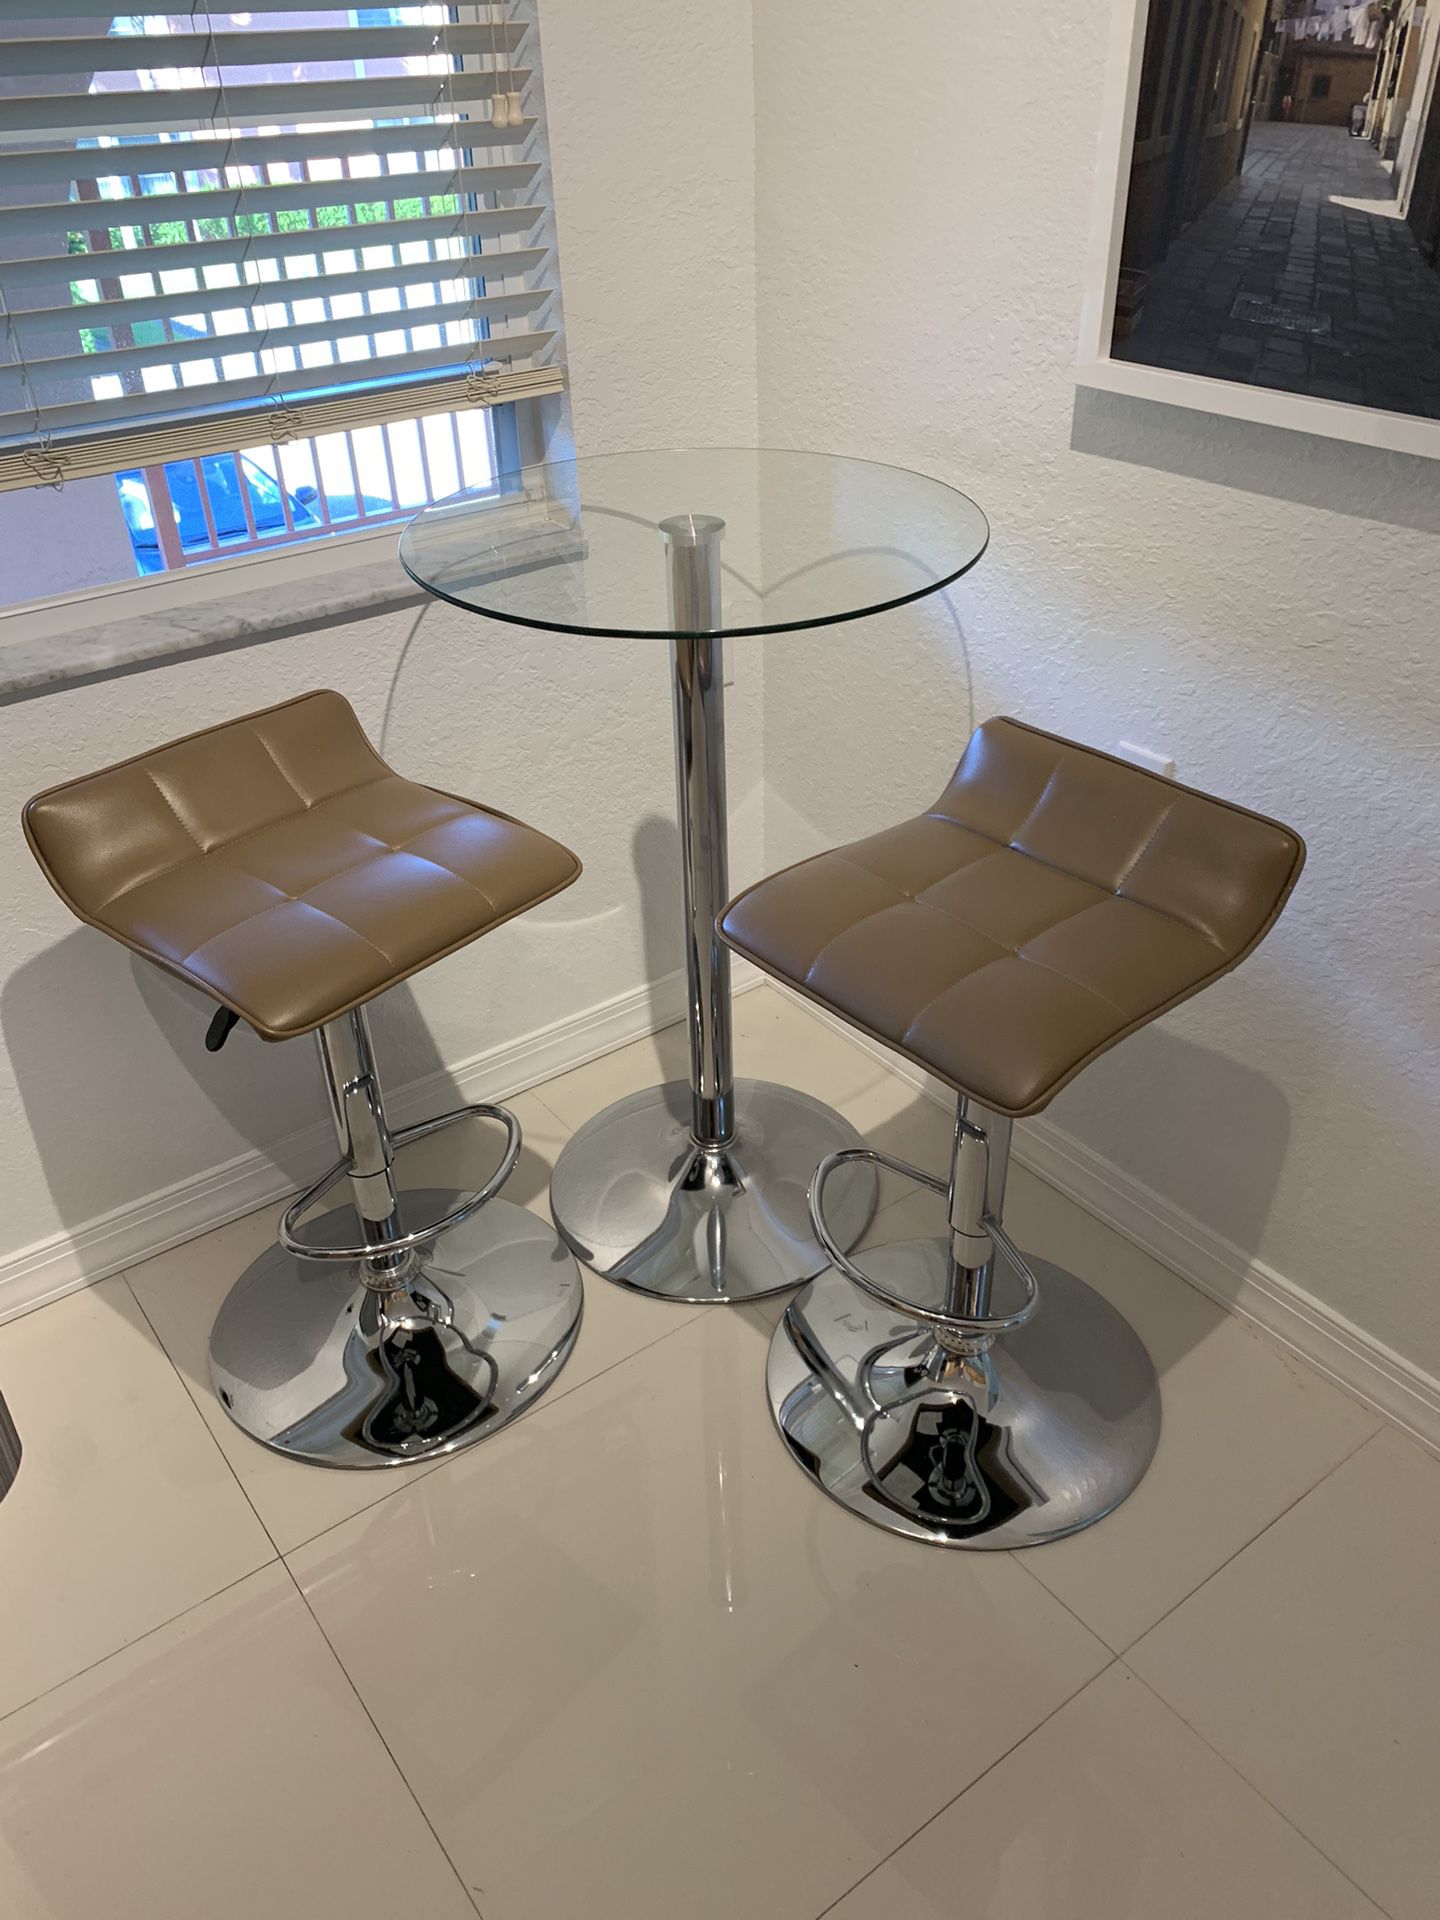 23.5 Inch Stainless Steel Bistro Table with 2 Adjustable Height Chairs